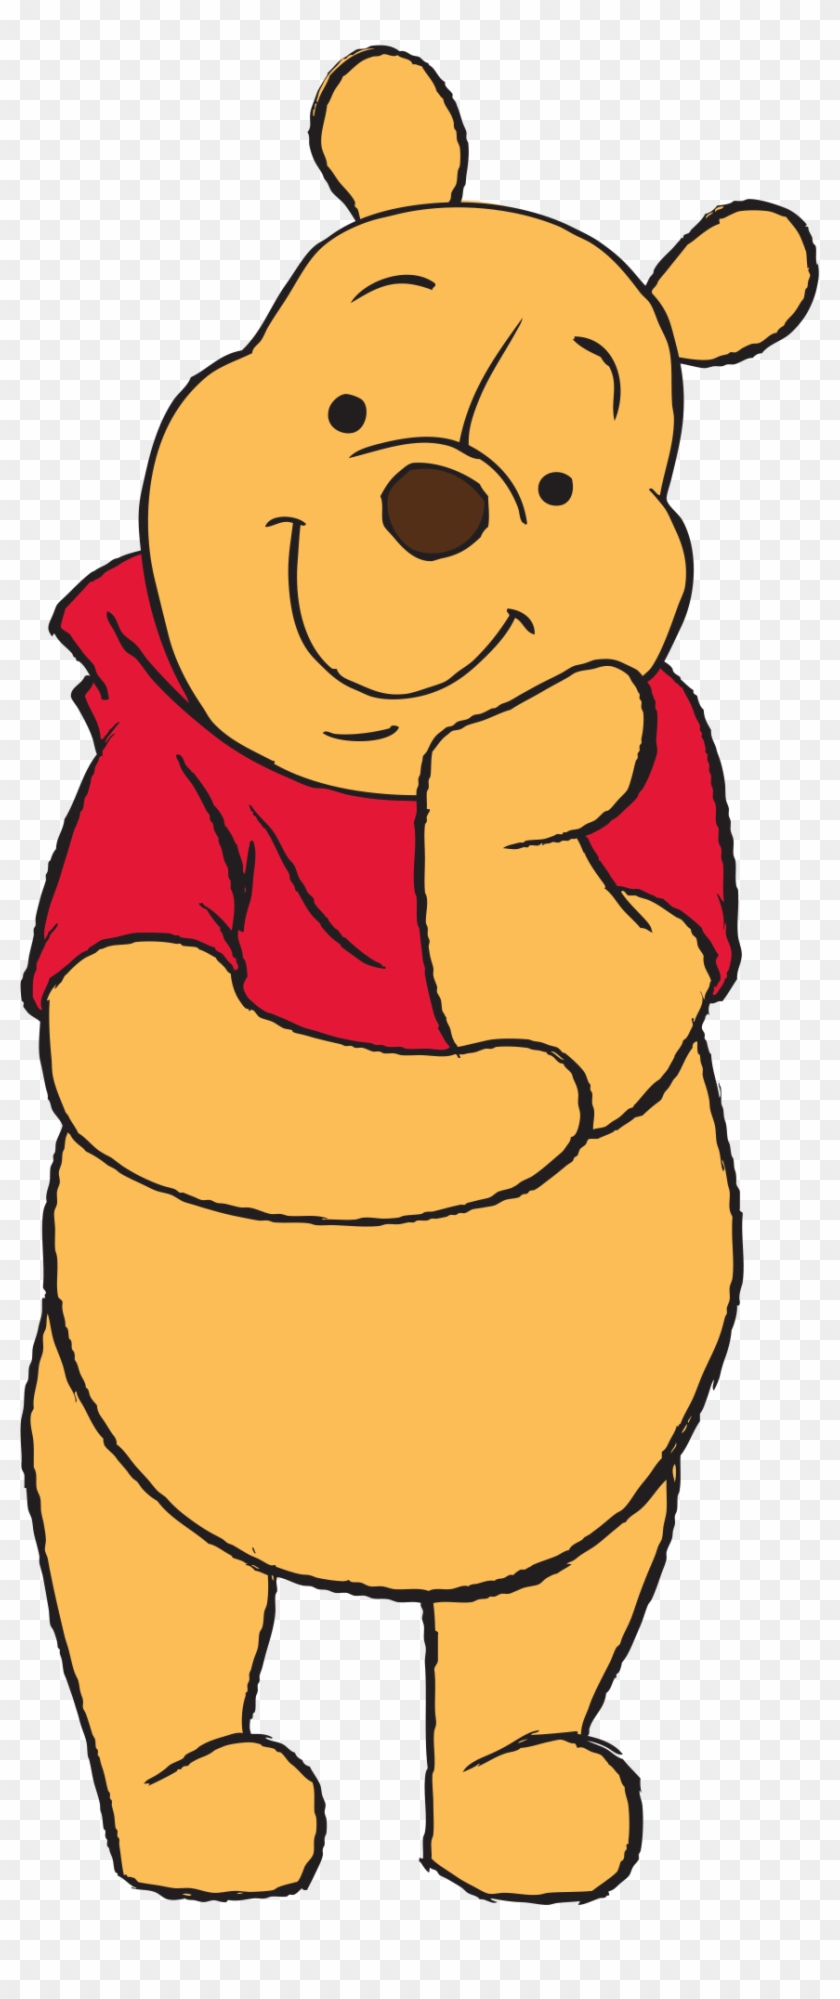 Winnie Pooh - Transparent Background Winnie The Pooh Png Clipart #350995